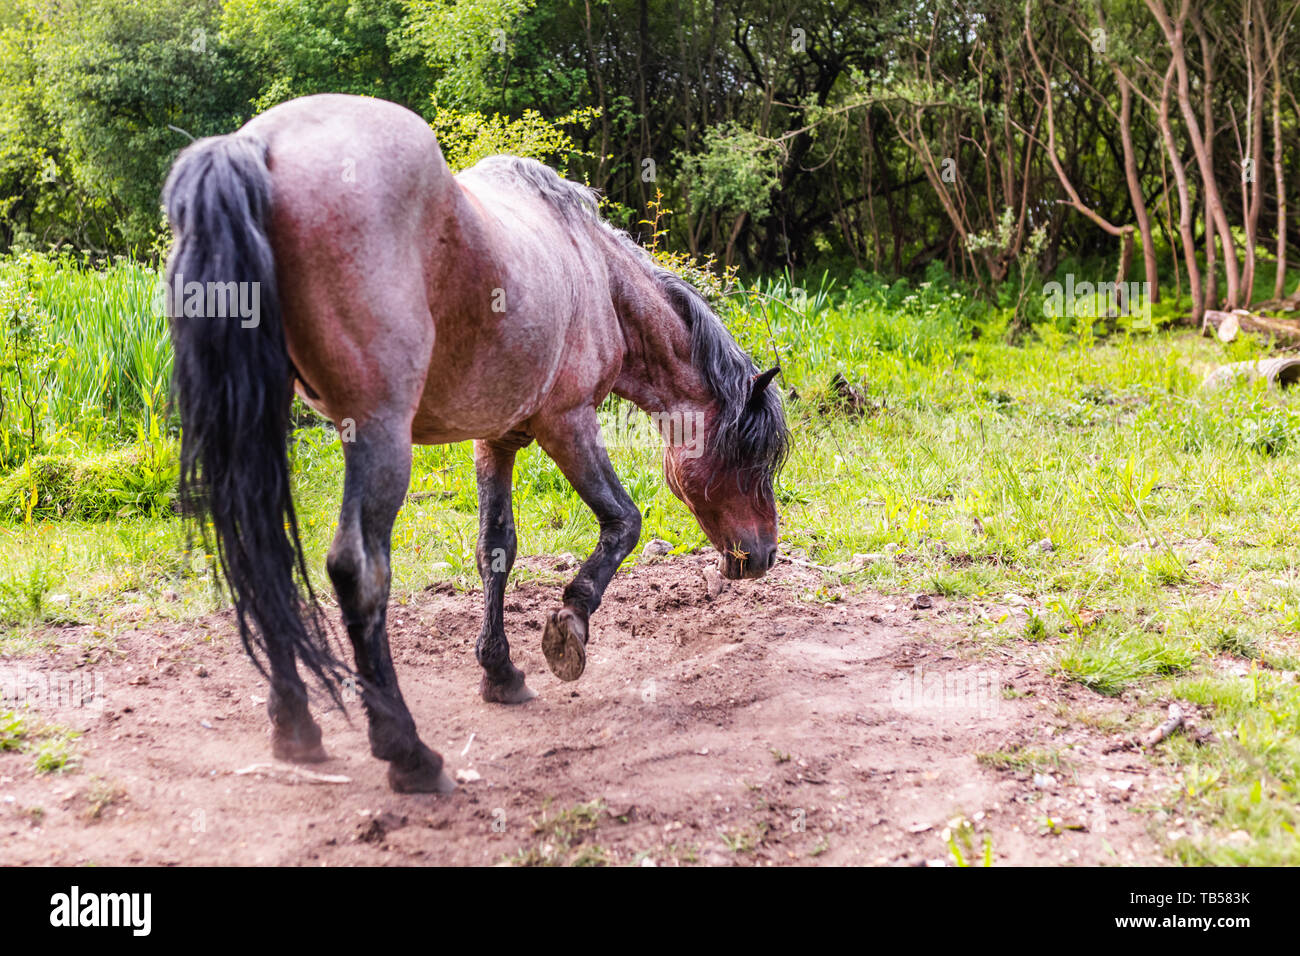 Candid animal portrait of wild brown pony pawing dusty ground prior to rolling. Taken in Dorset, England. Stock Photo